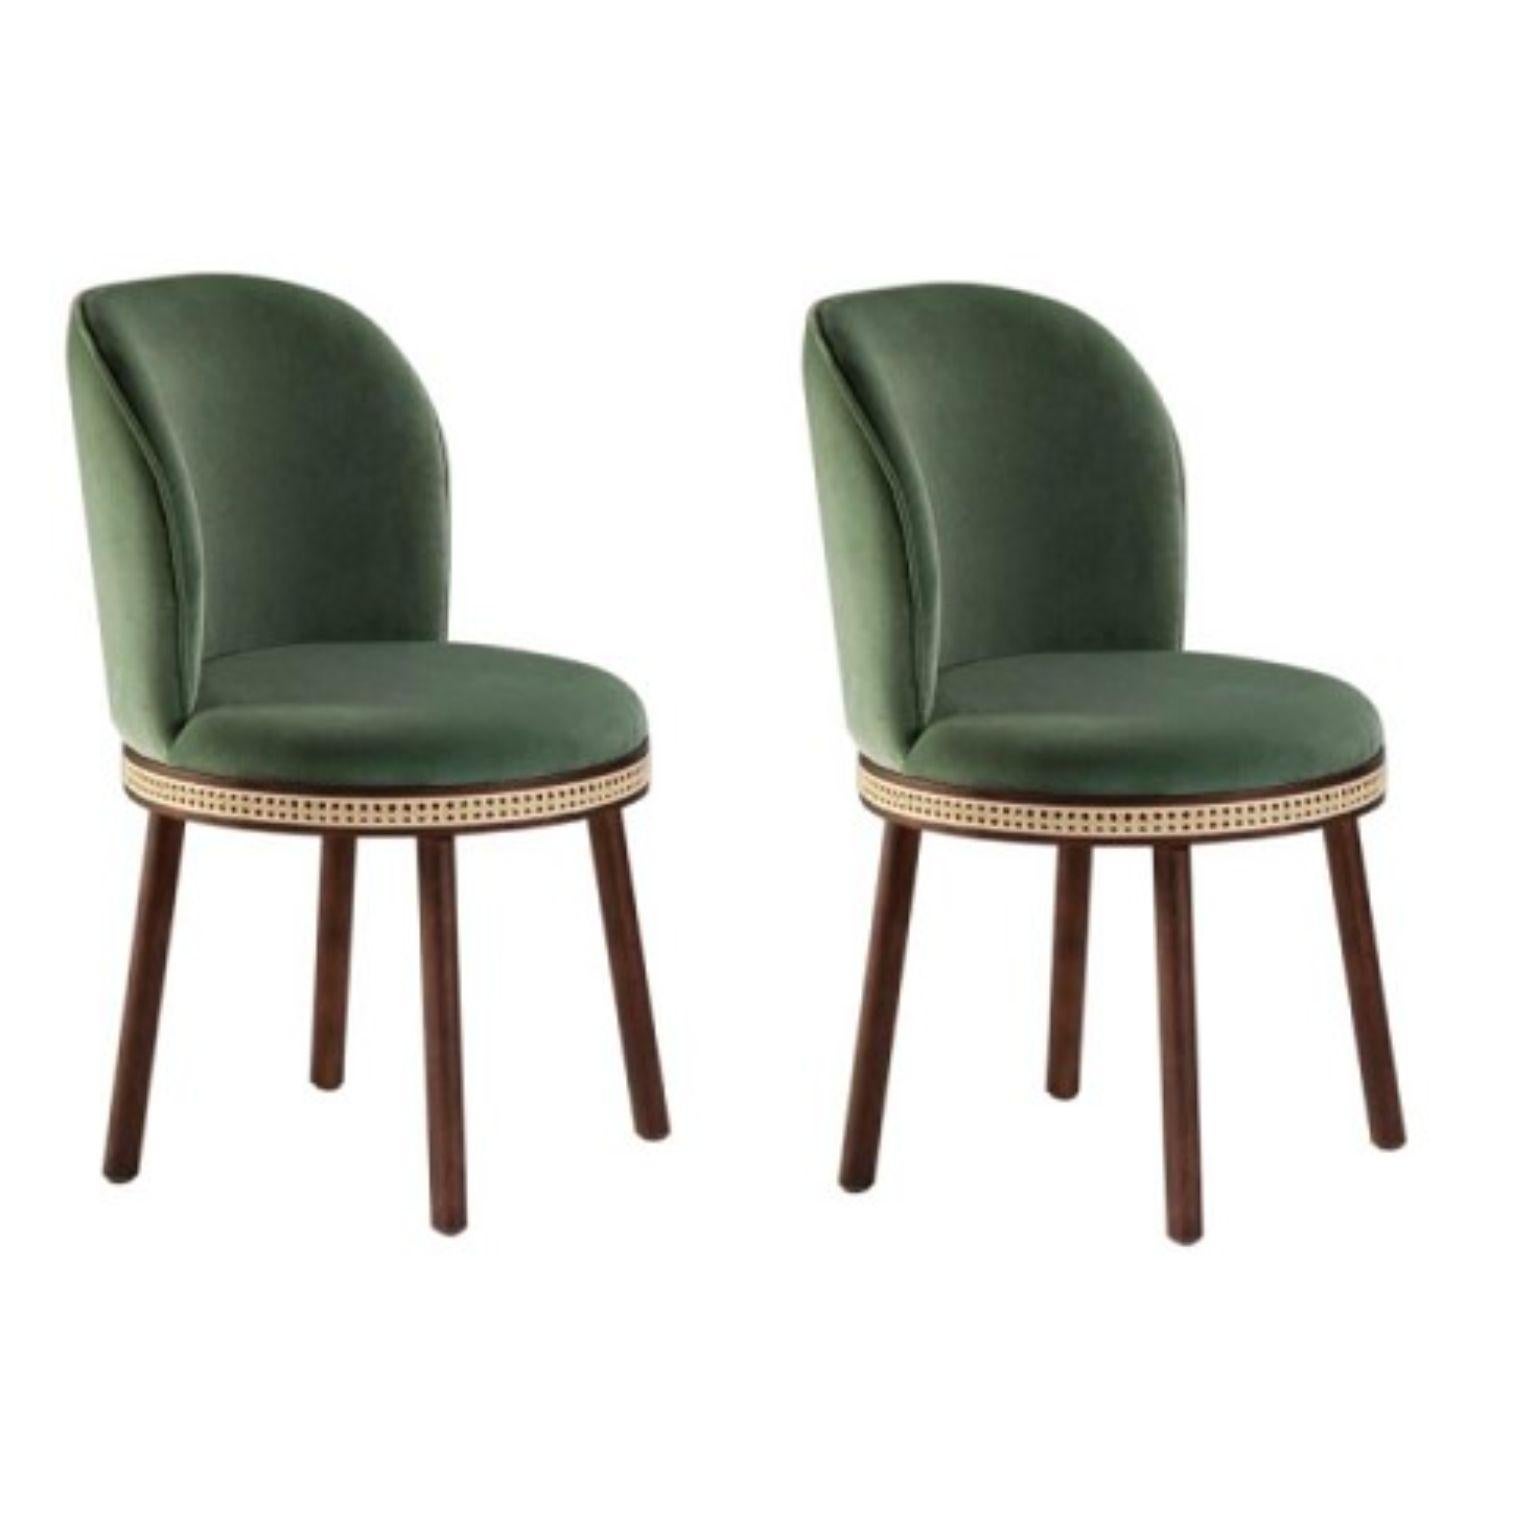 Set of 2 Alma chairs by Dooq
Measures: W 51 cm 20”
D 53 cm 21”
H 86 cm 34”
Seat height 49 cm 19”

Materials: Upholstery fabric or leather; structure solid wood feet lacquered MDF or solid wood rattan natural rattan. COM with natural walnut or